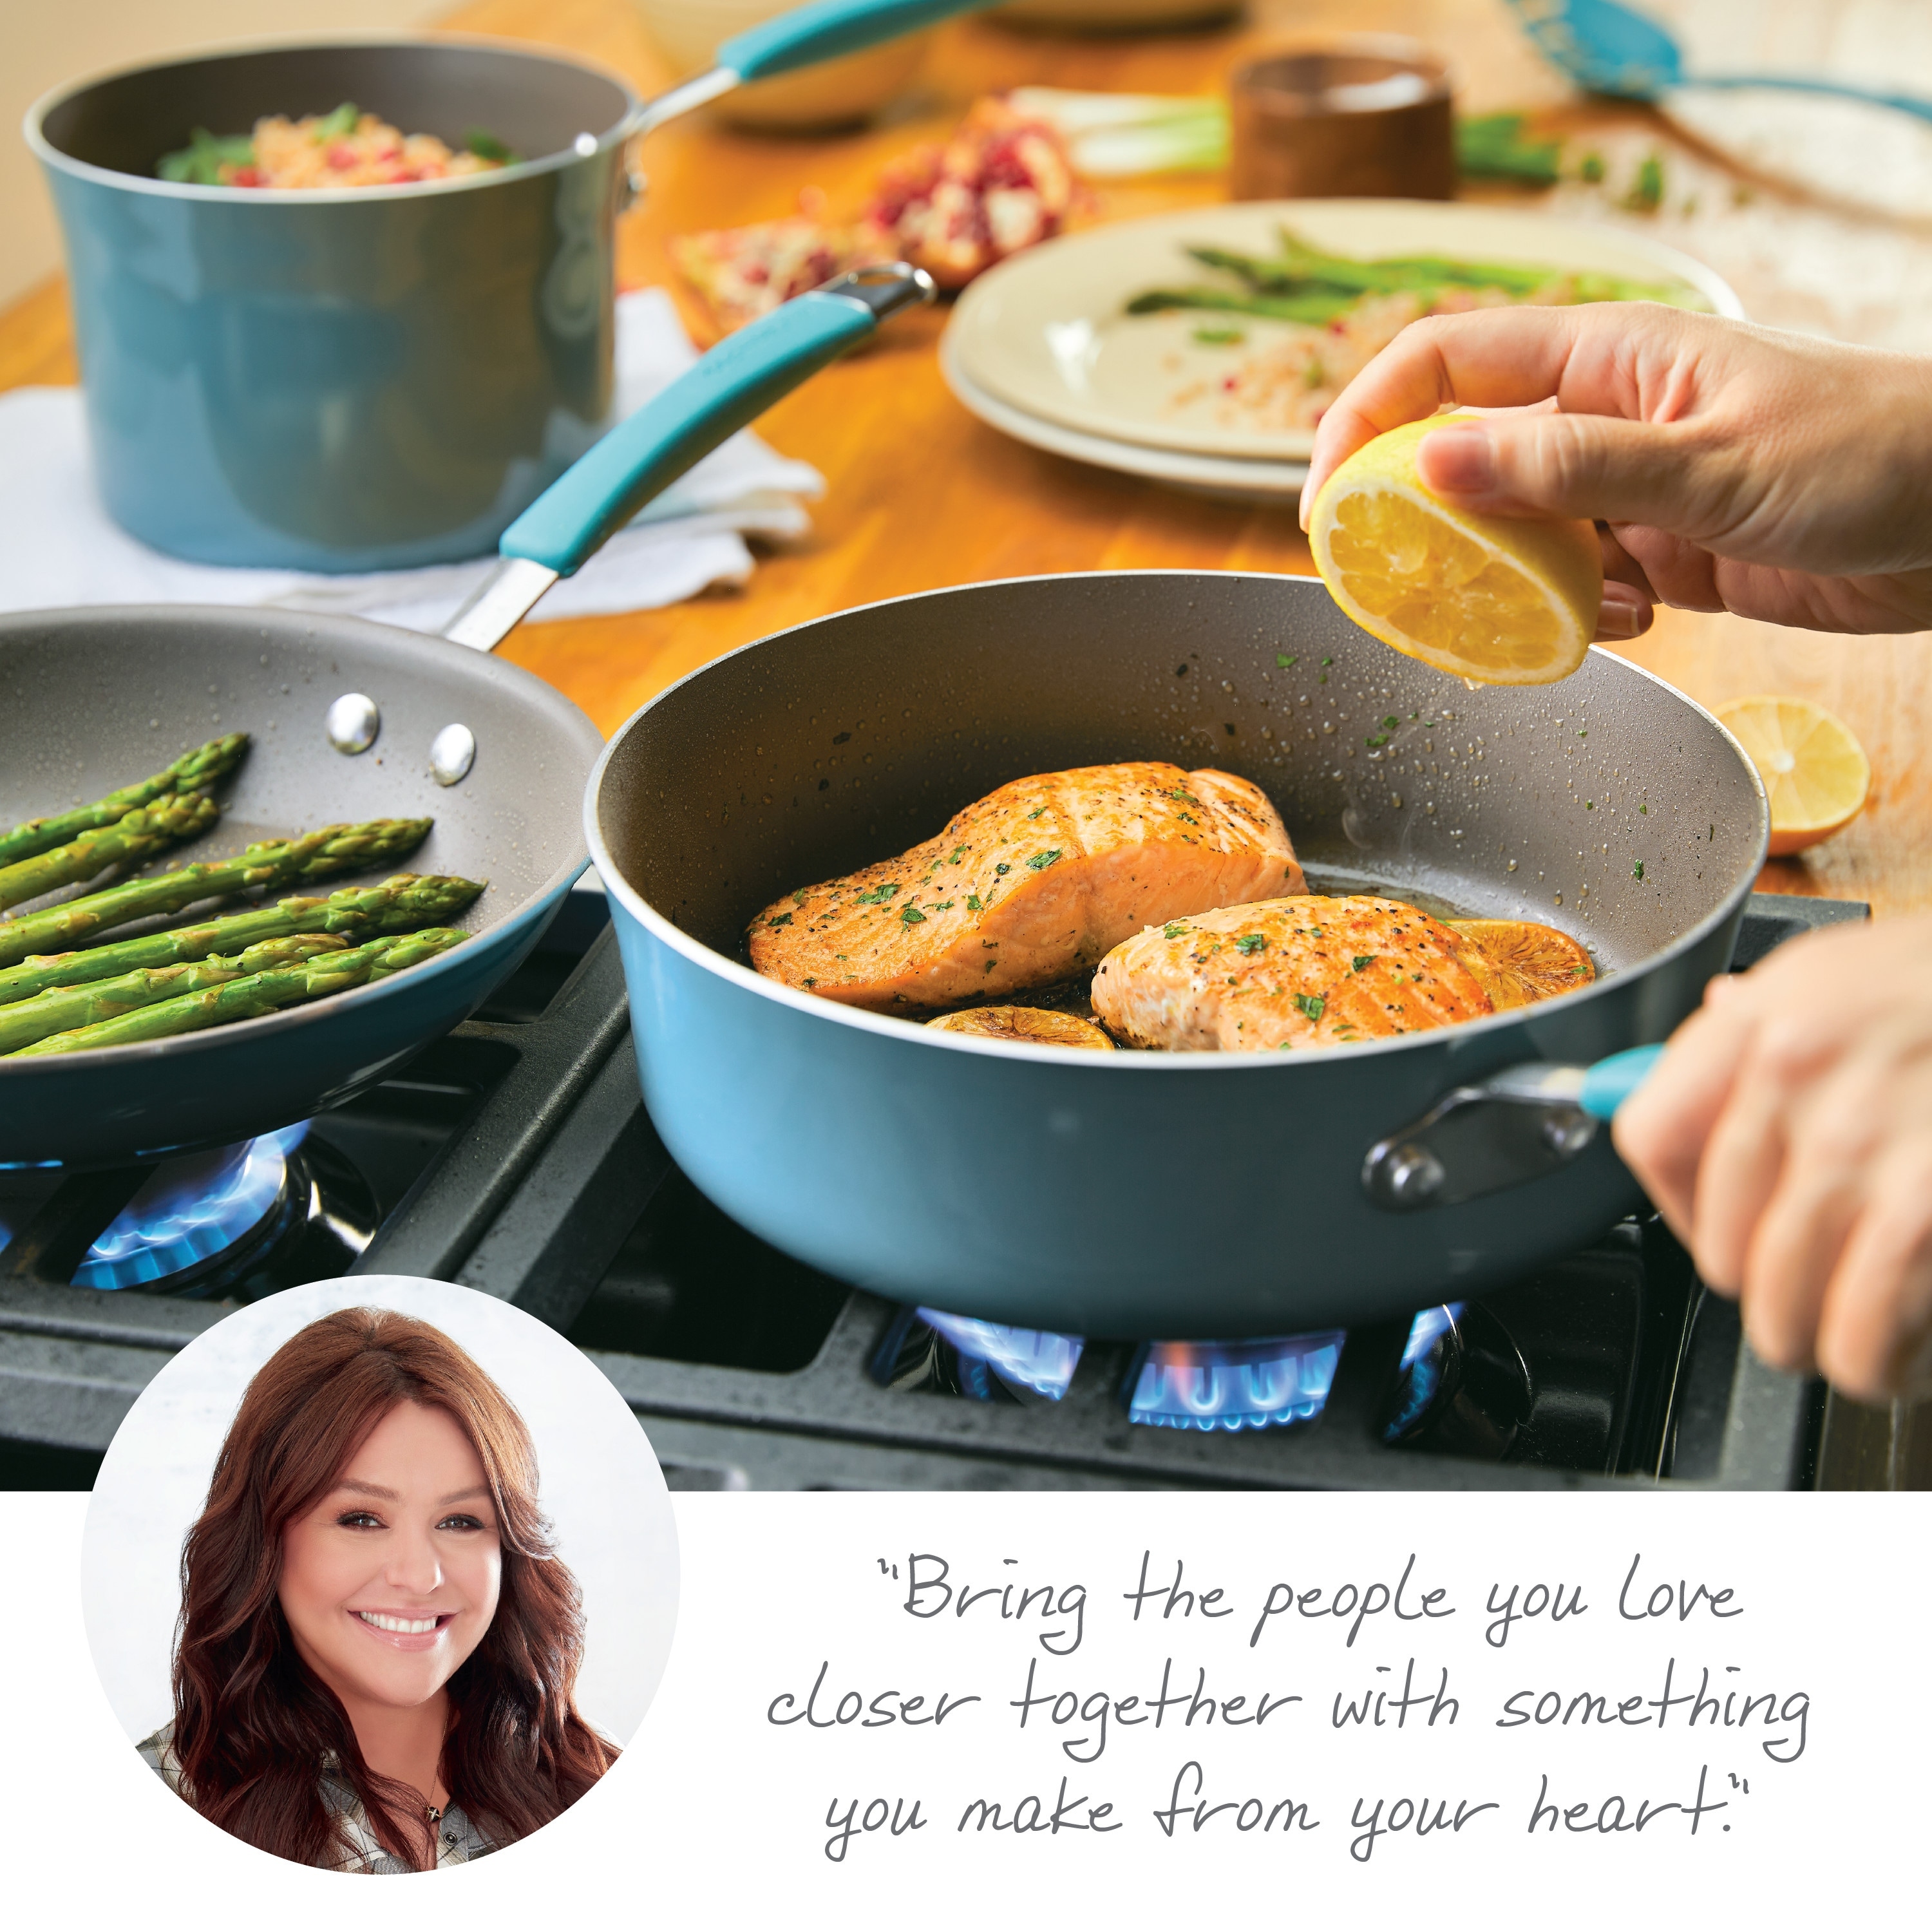 Rachael Ray Cucina Porcelain Enamel 14 Piece Nonstick Cookware and Measuring Cup Set - Agave Blue